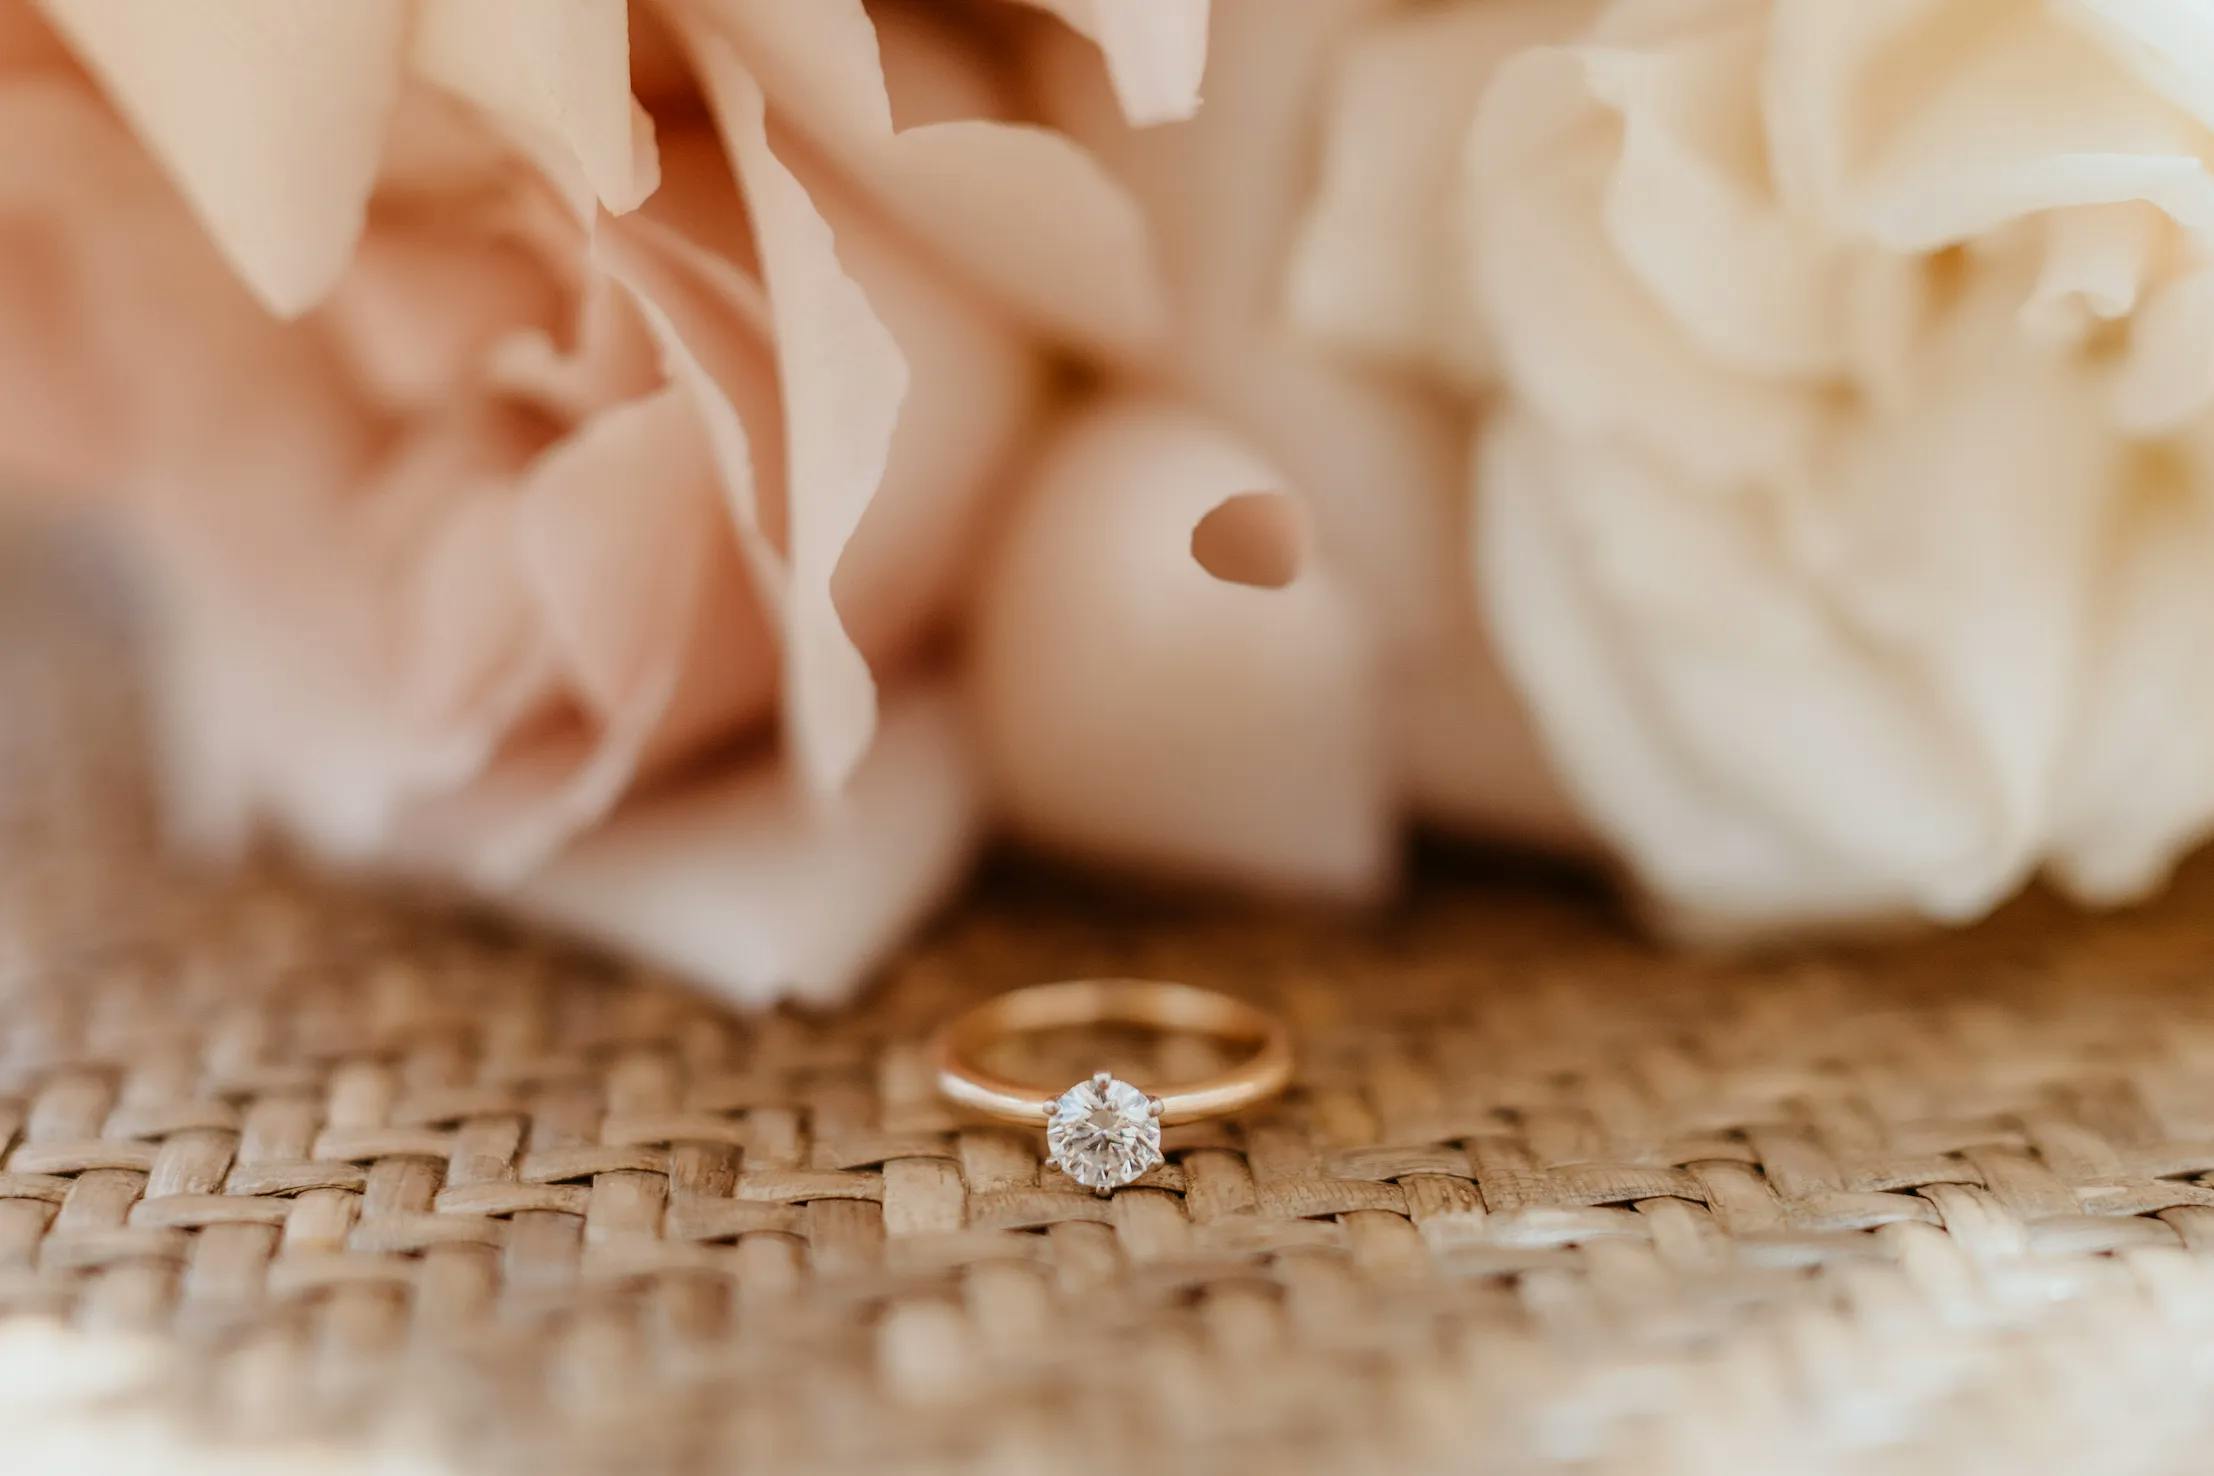 A gold engagement ring featuring a round diamond sits on a woven surface. Behind the ring, delicate blush and cream-colored flowers are slightly blurred, creating a soft, romantic background.